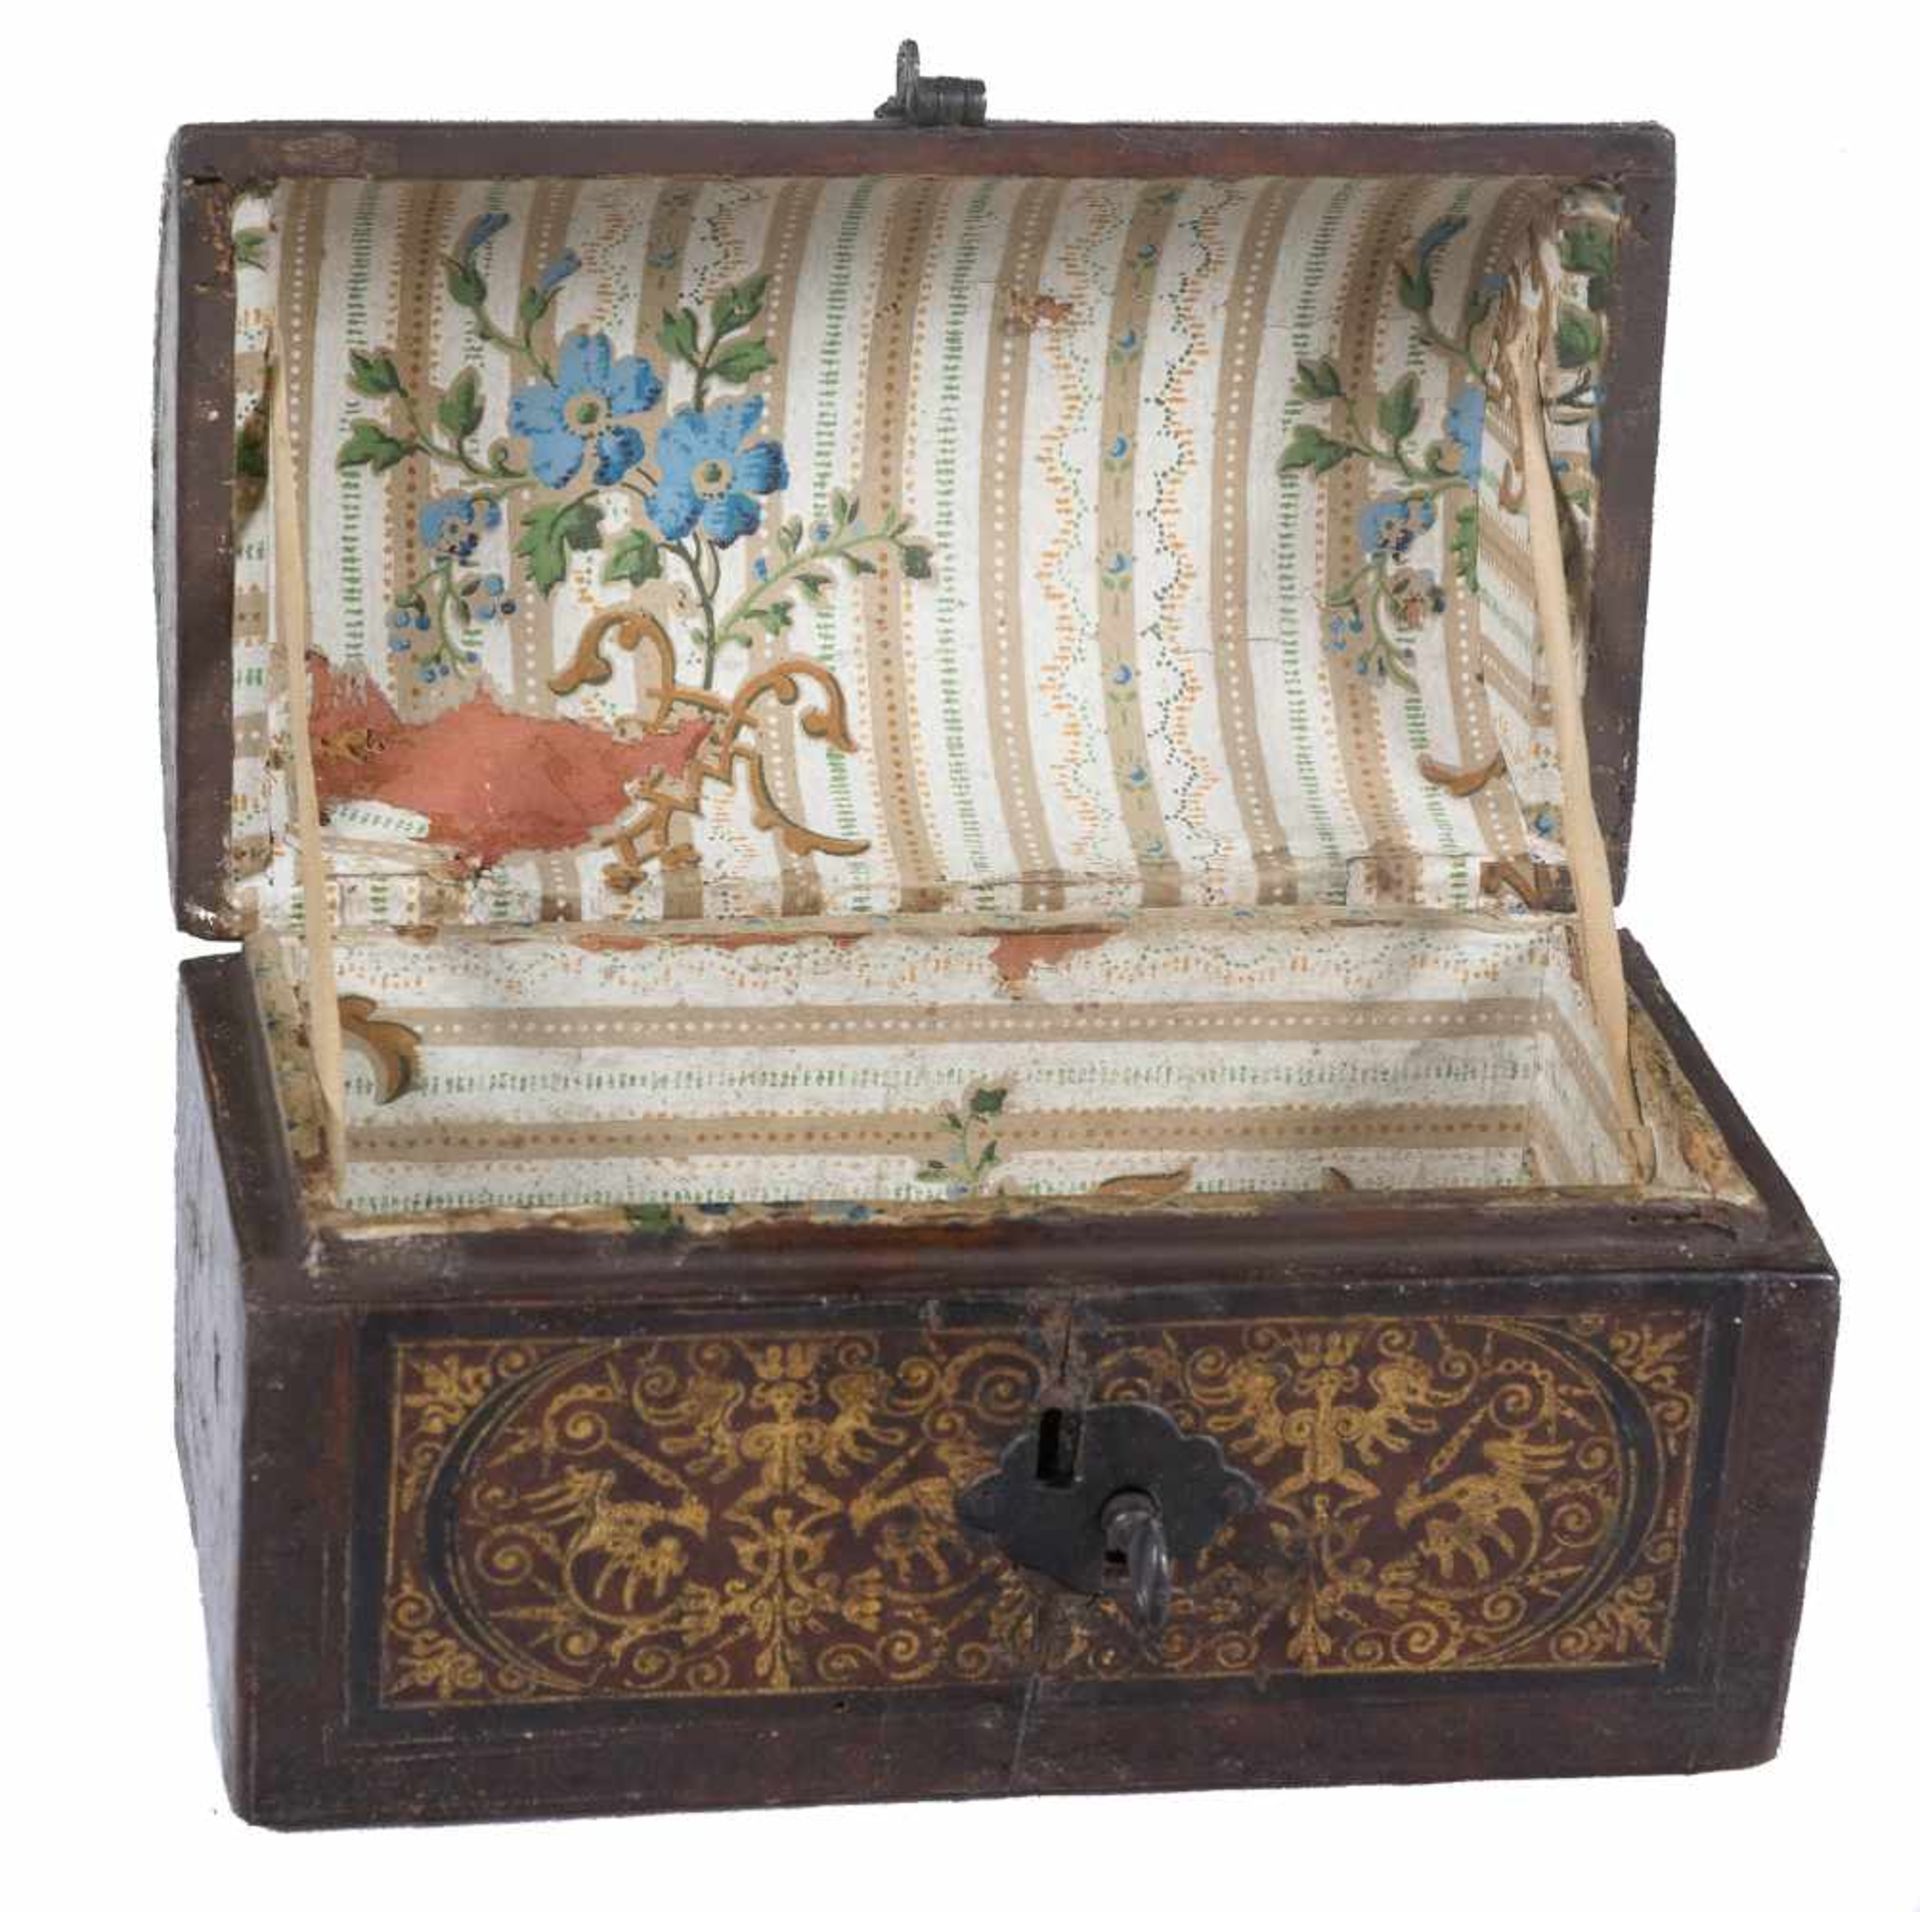 Wooden chest covered in leather with gold goffering and iron fittings. 17th century. The inside is - Bild 2 aus 3